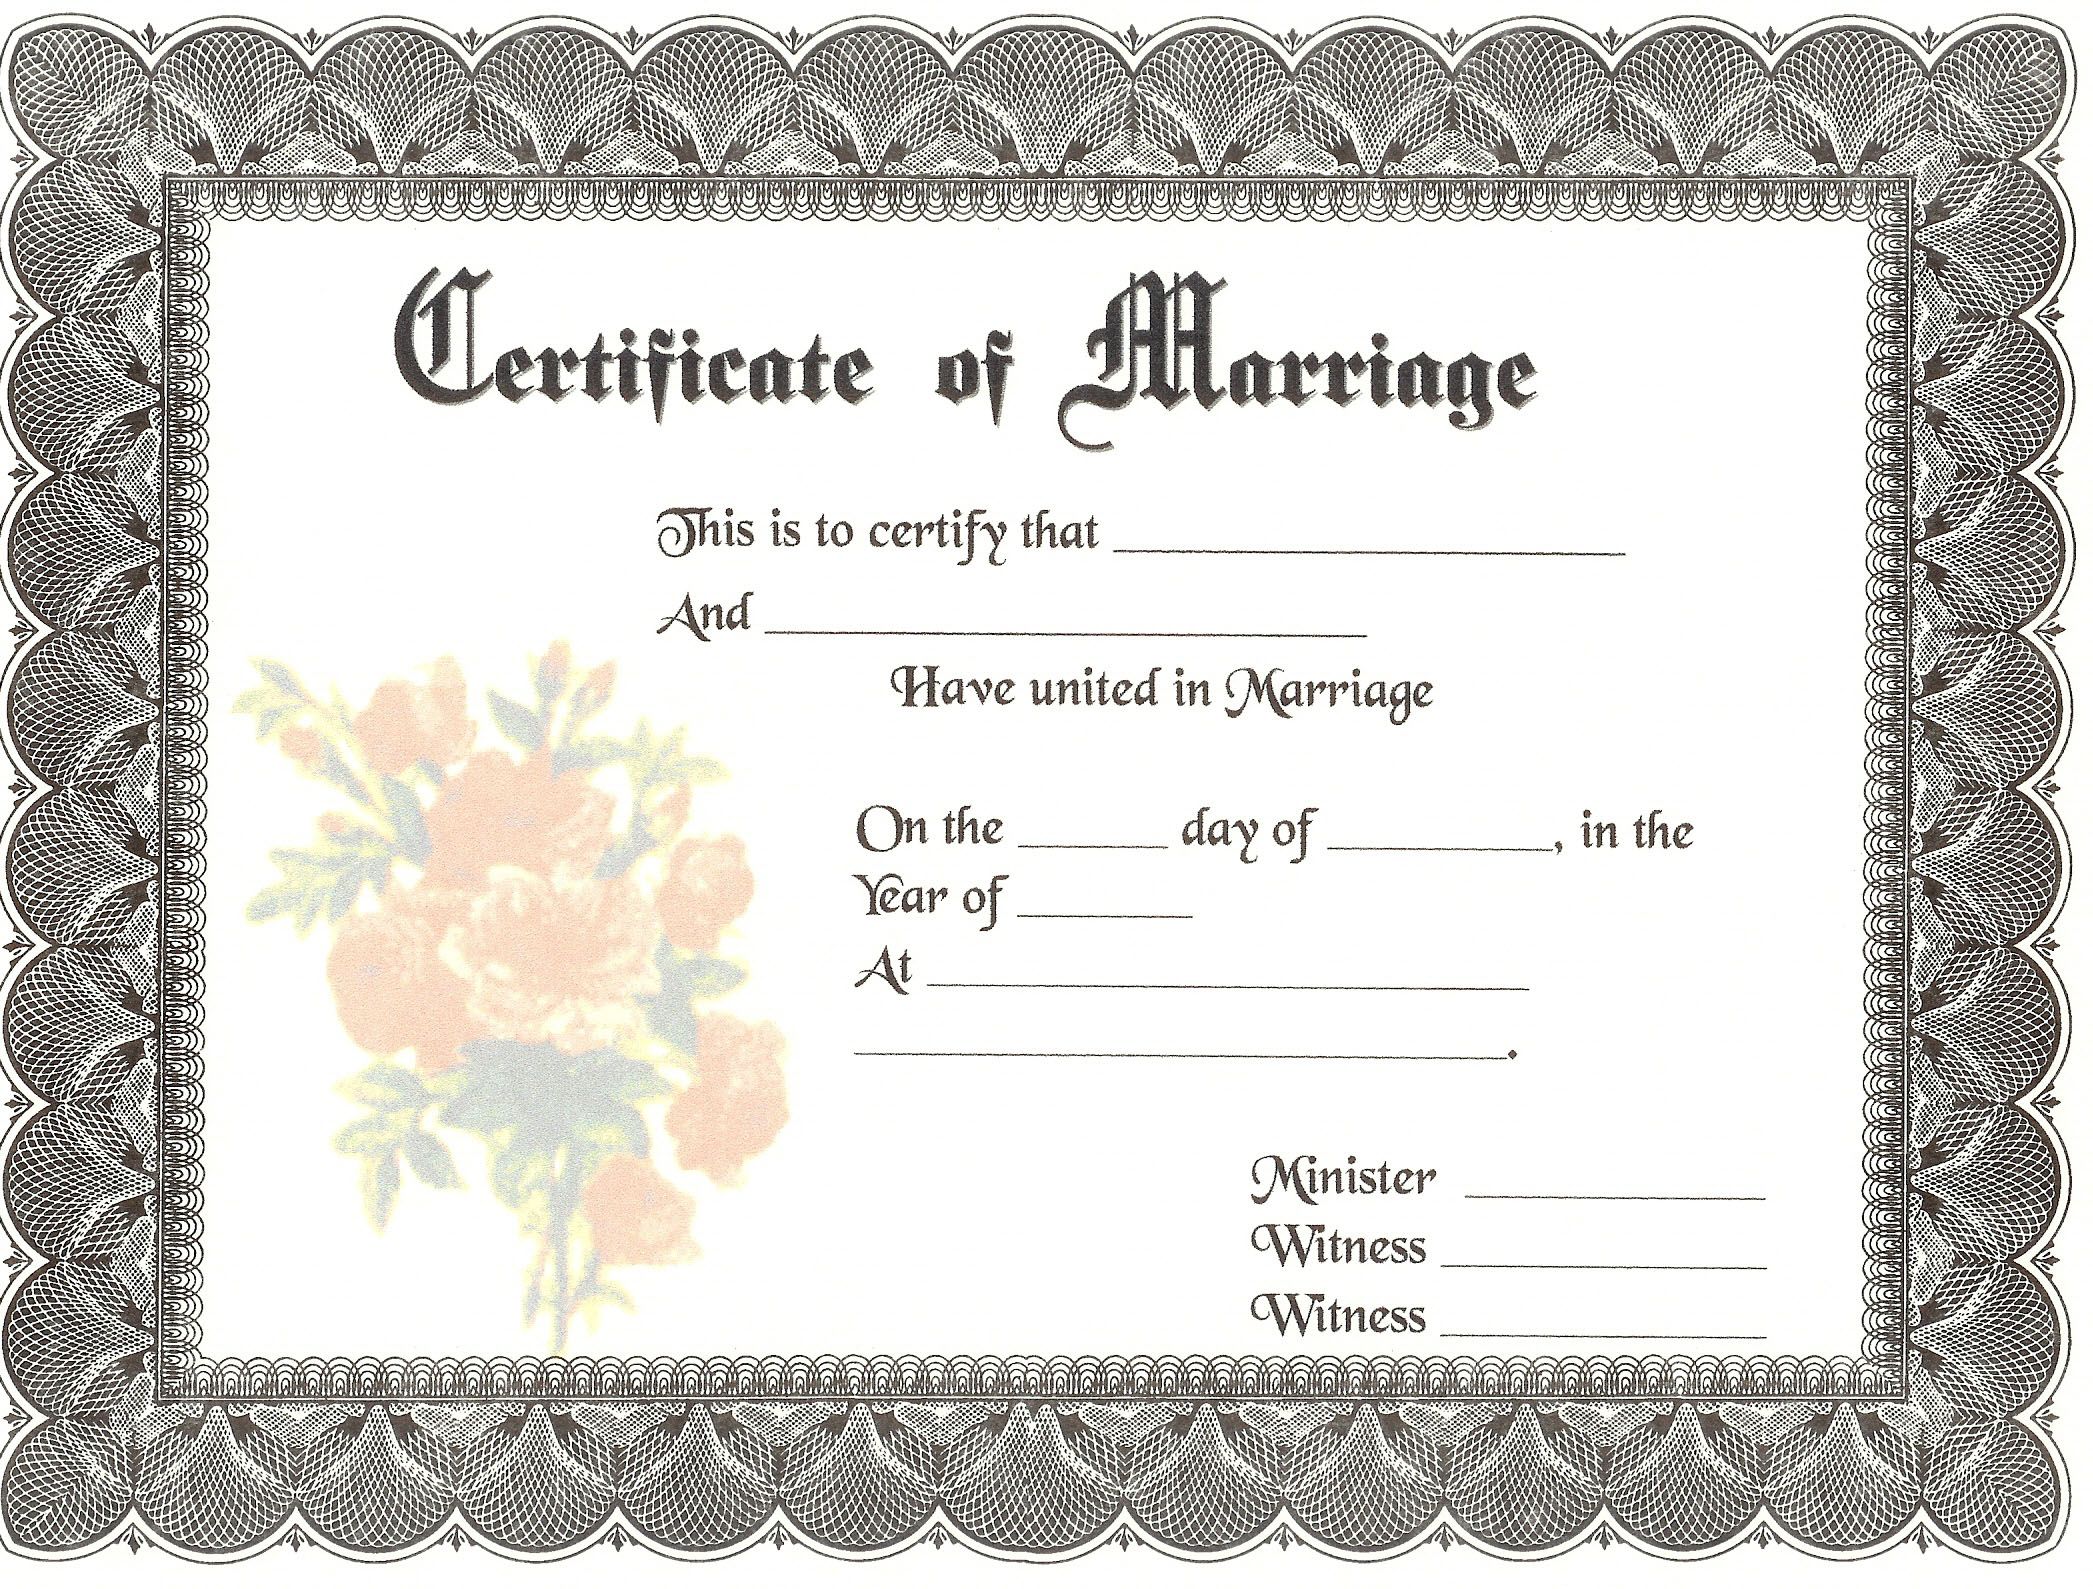 Blank Marriage Certificate Marriage Certificate Gift Certificate Template Wedding Certificate